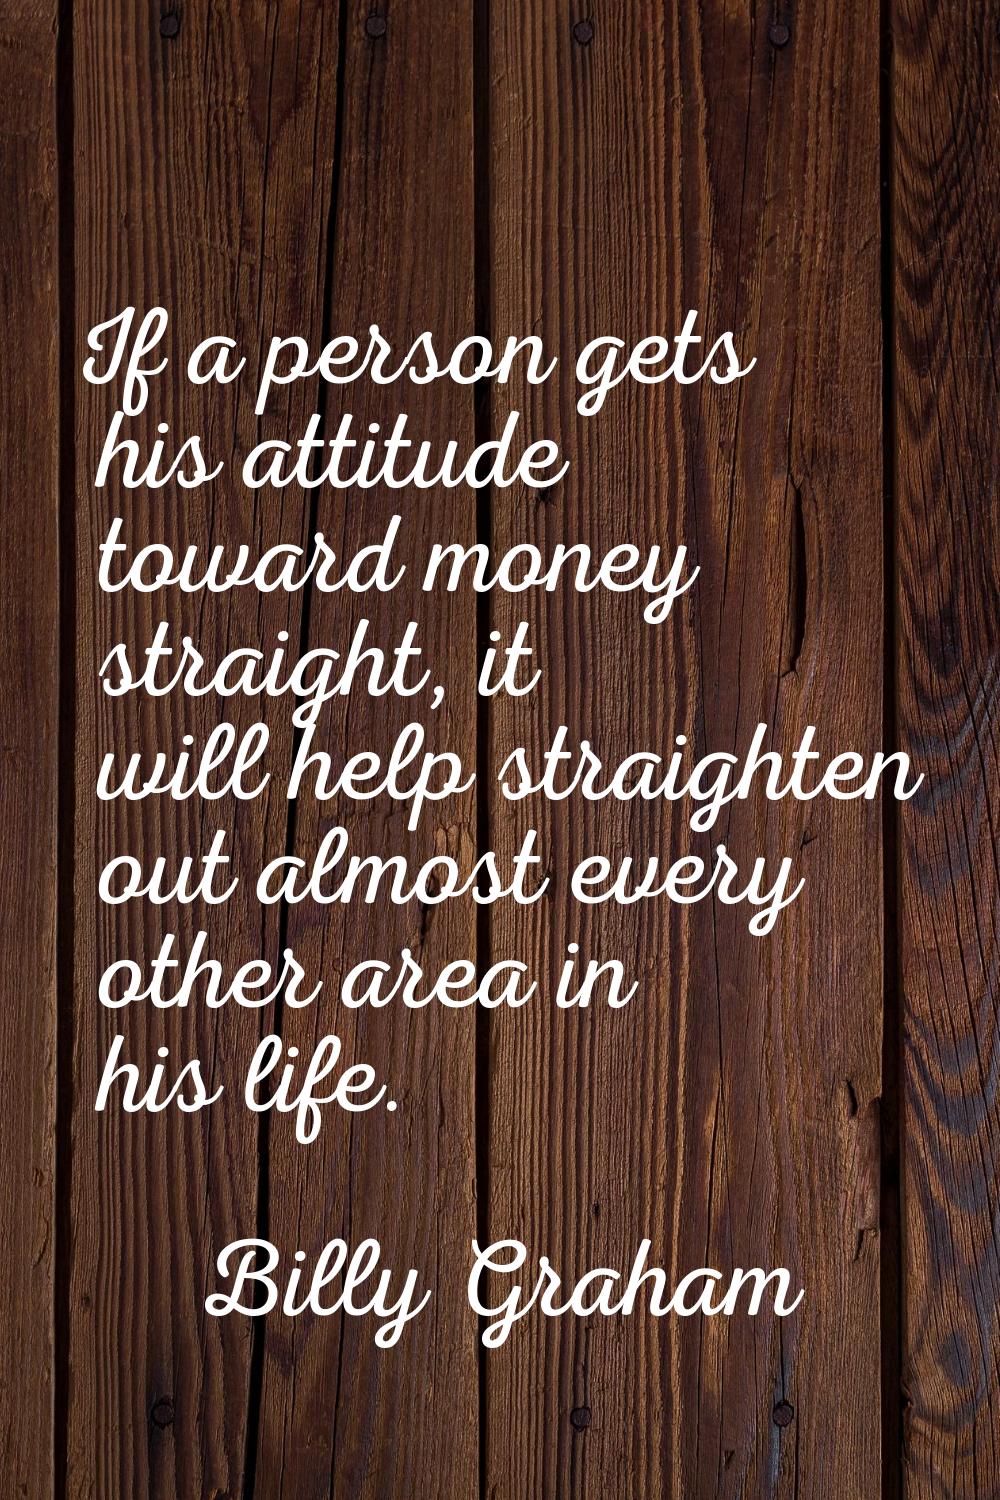 If a person gets his attitude toward money straight, it will help straighten out almost every other